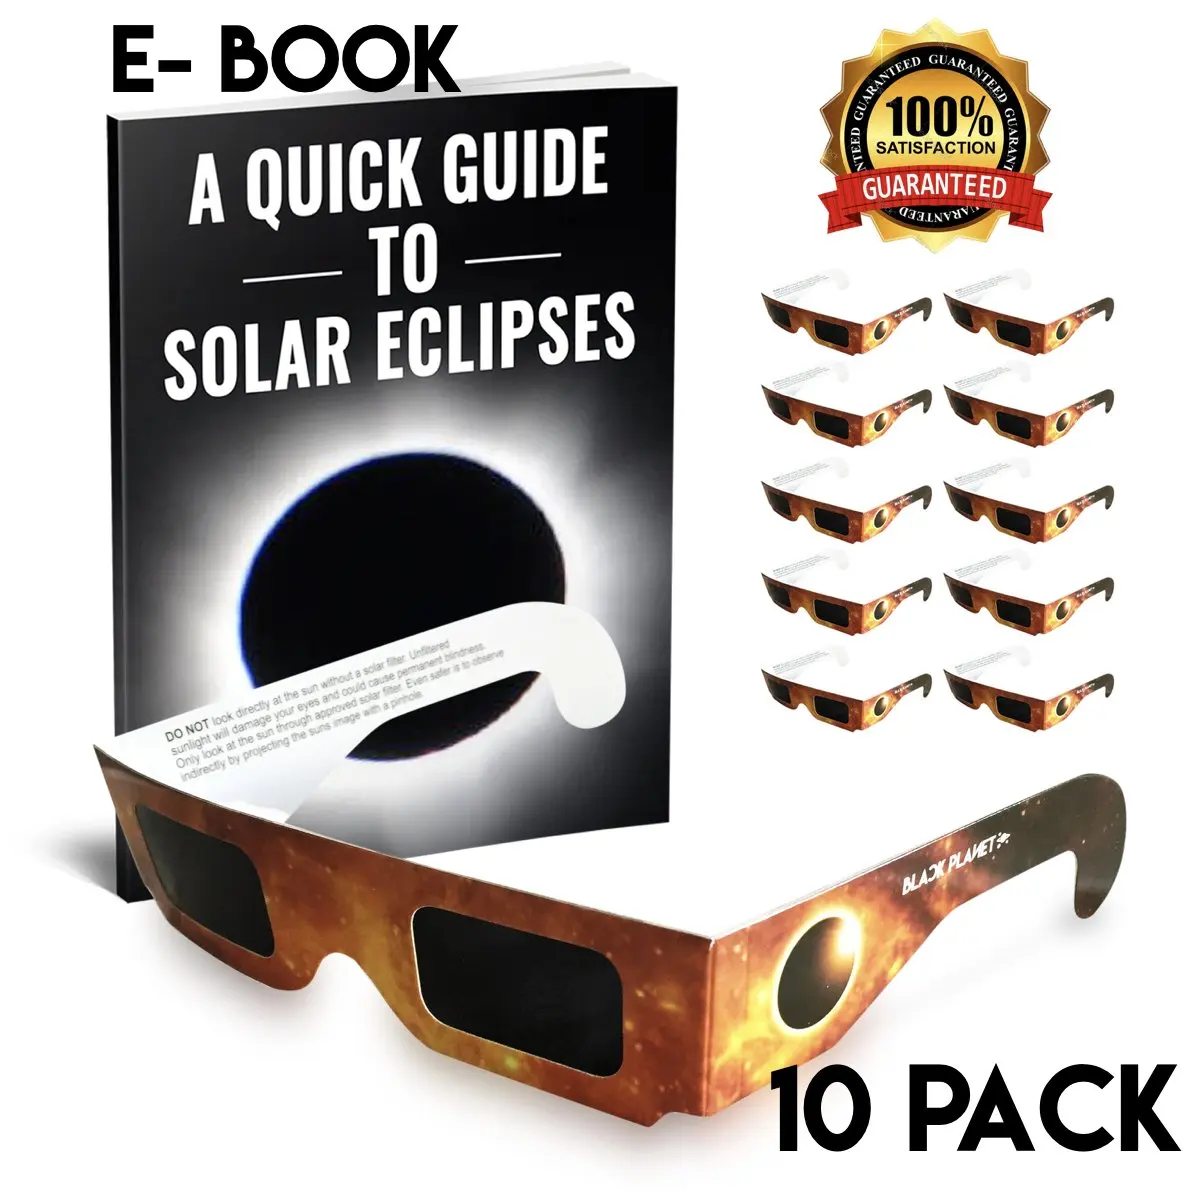 Rainbow Symphony Eclipse Glasses Package of 250 Safe Solar Viewers